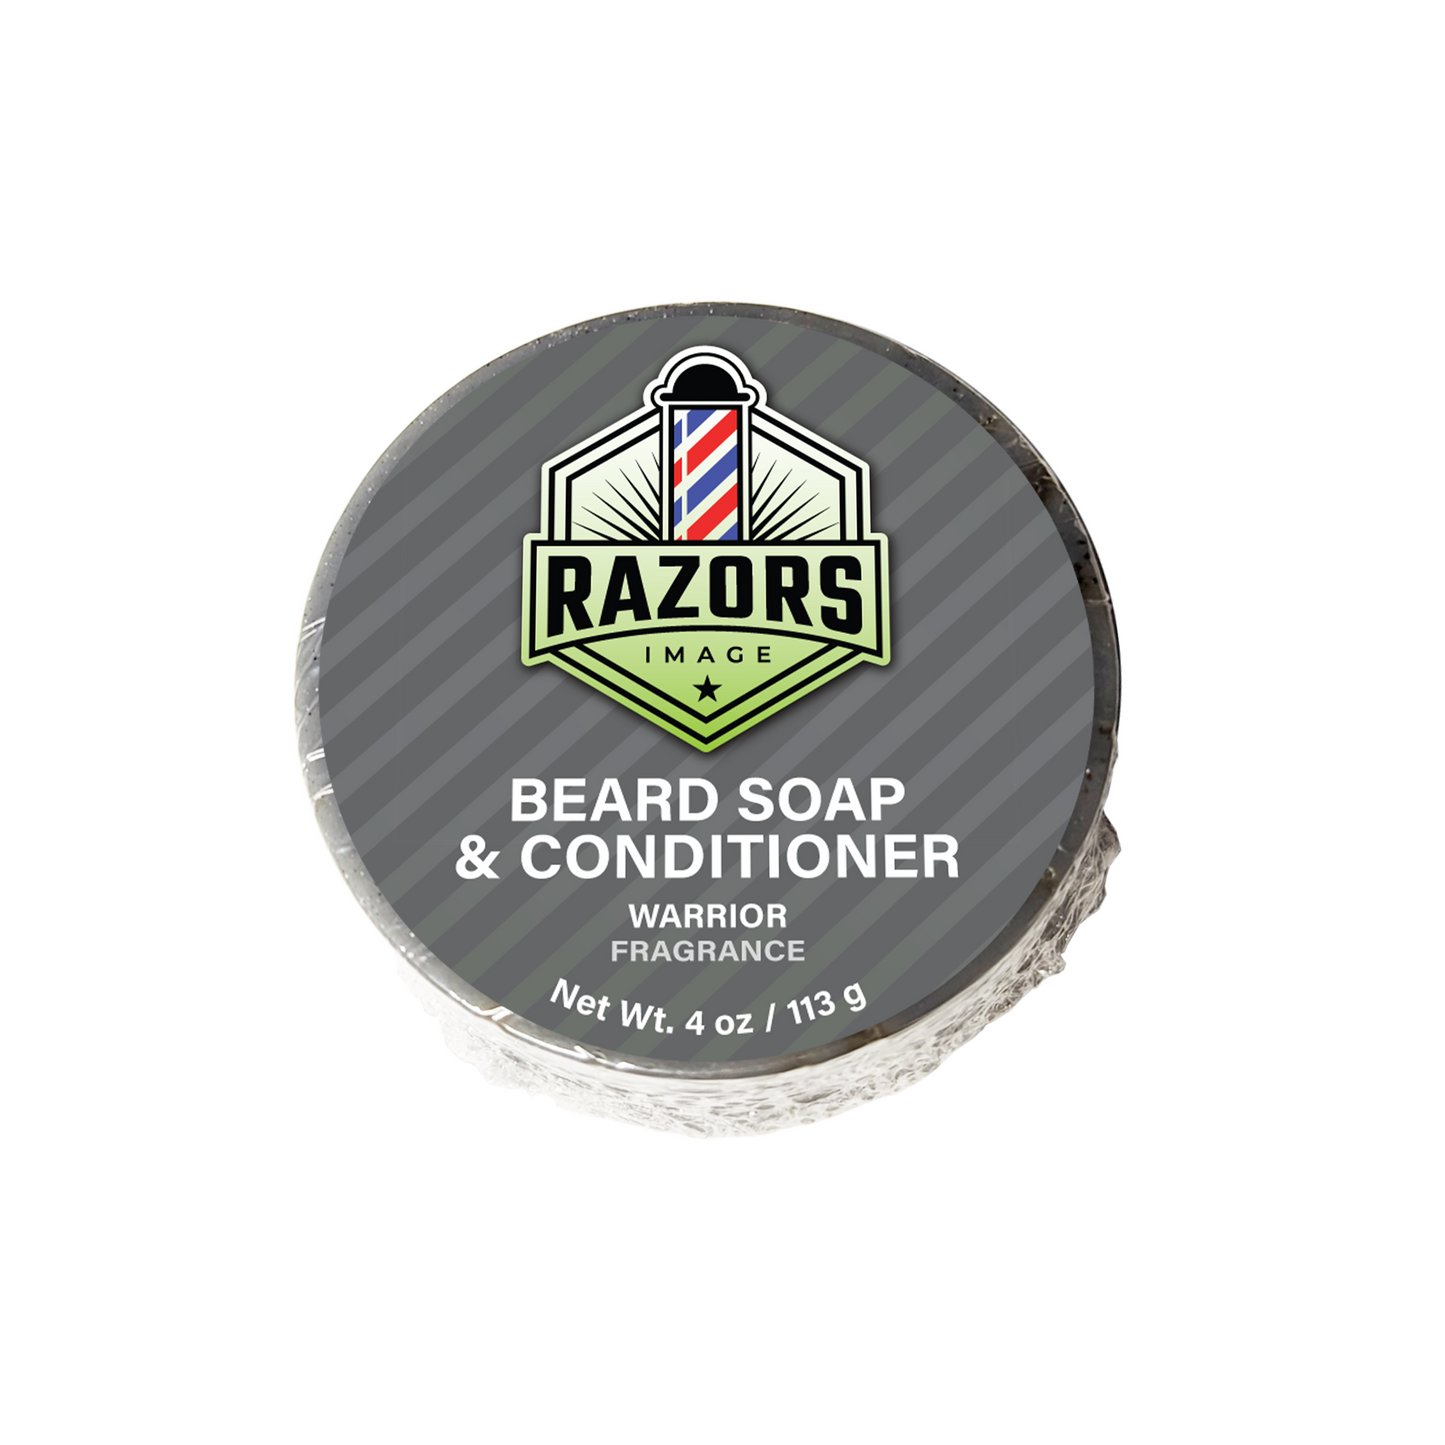 Warrior Beard Soap and Conditioner with wrapper